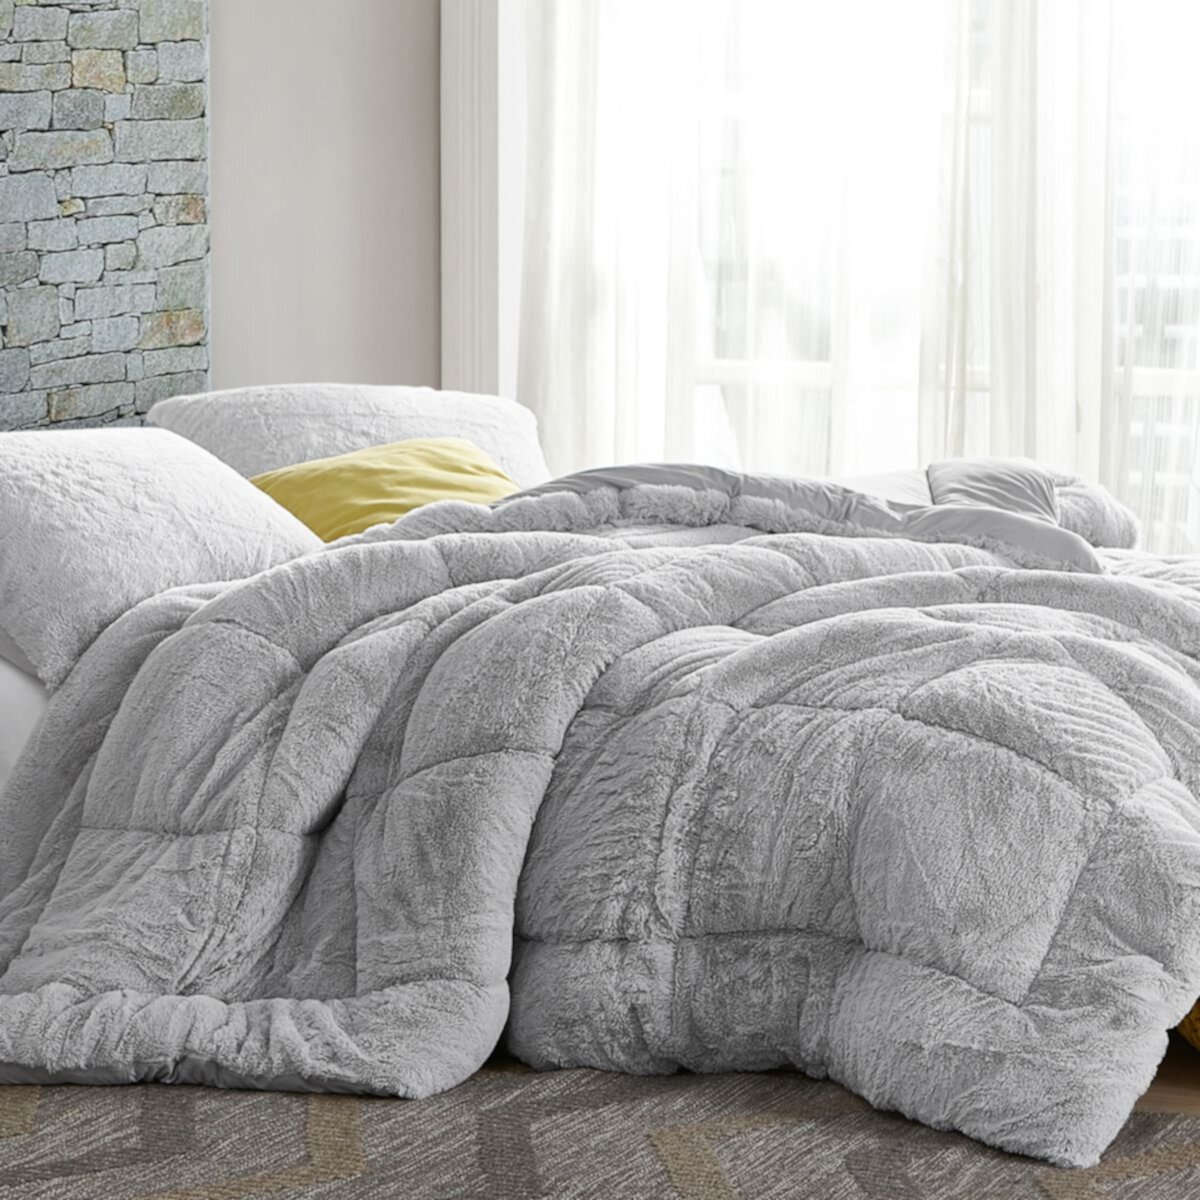 Are You Kidding Bare - Одеяло Coma Inducer® - Antarctica Grey Byourbed